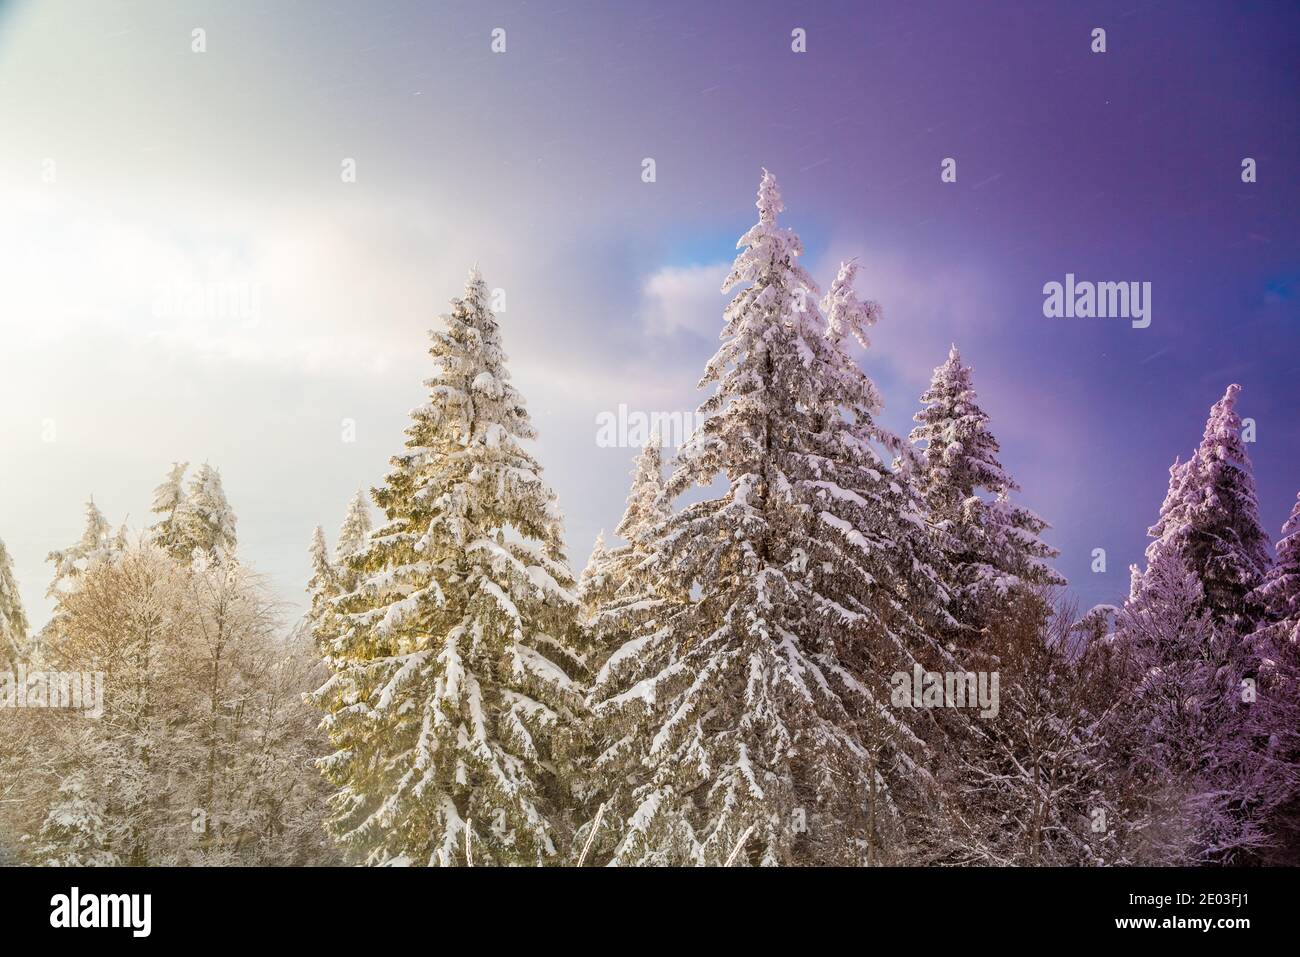 Snow-covered trees in a mysterious color under sunlight Stock Photo